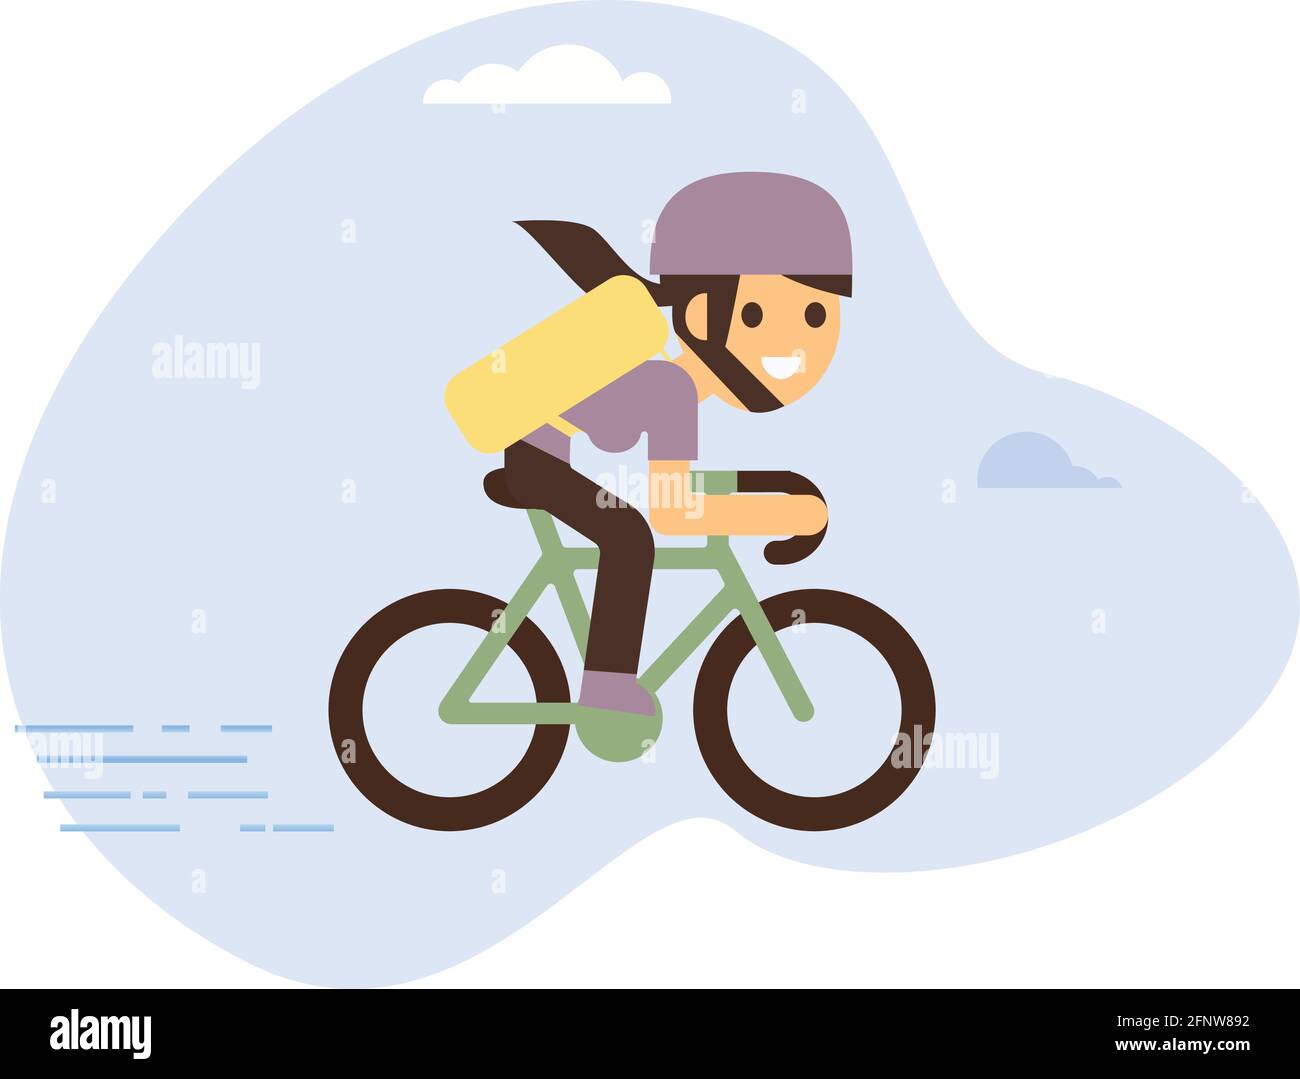 Courier bicycle delivery girl with parcel box on the back. Ecological city bike delivering service illustration with modern cyclist carrying package. Stock Vector